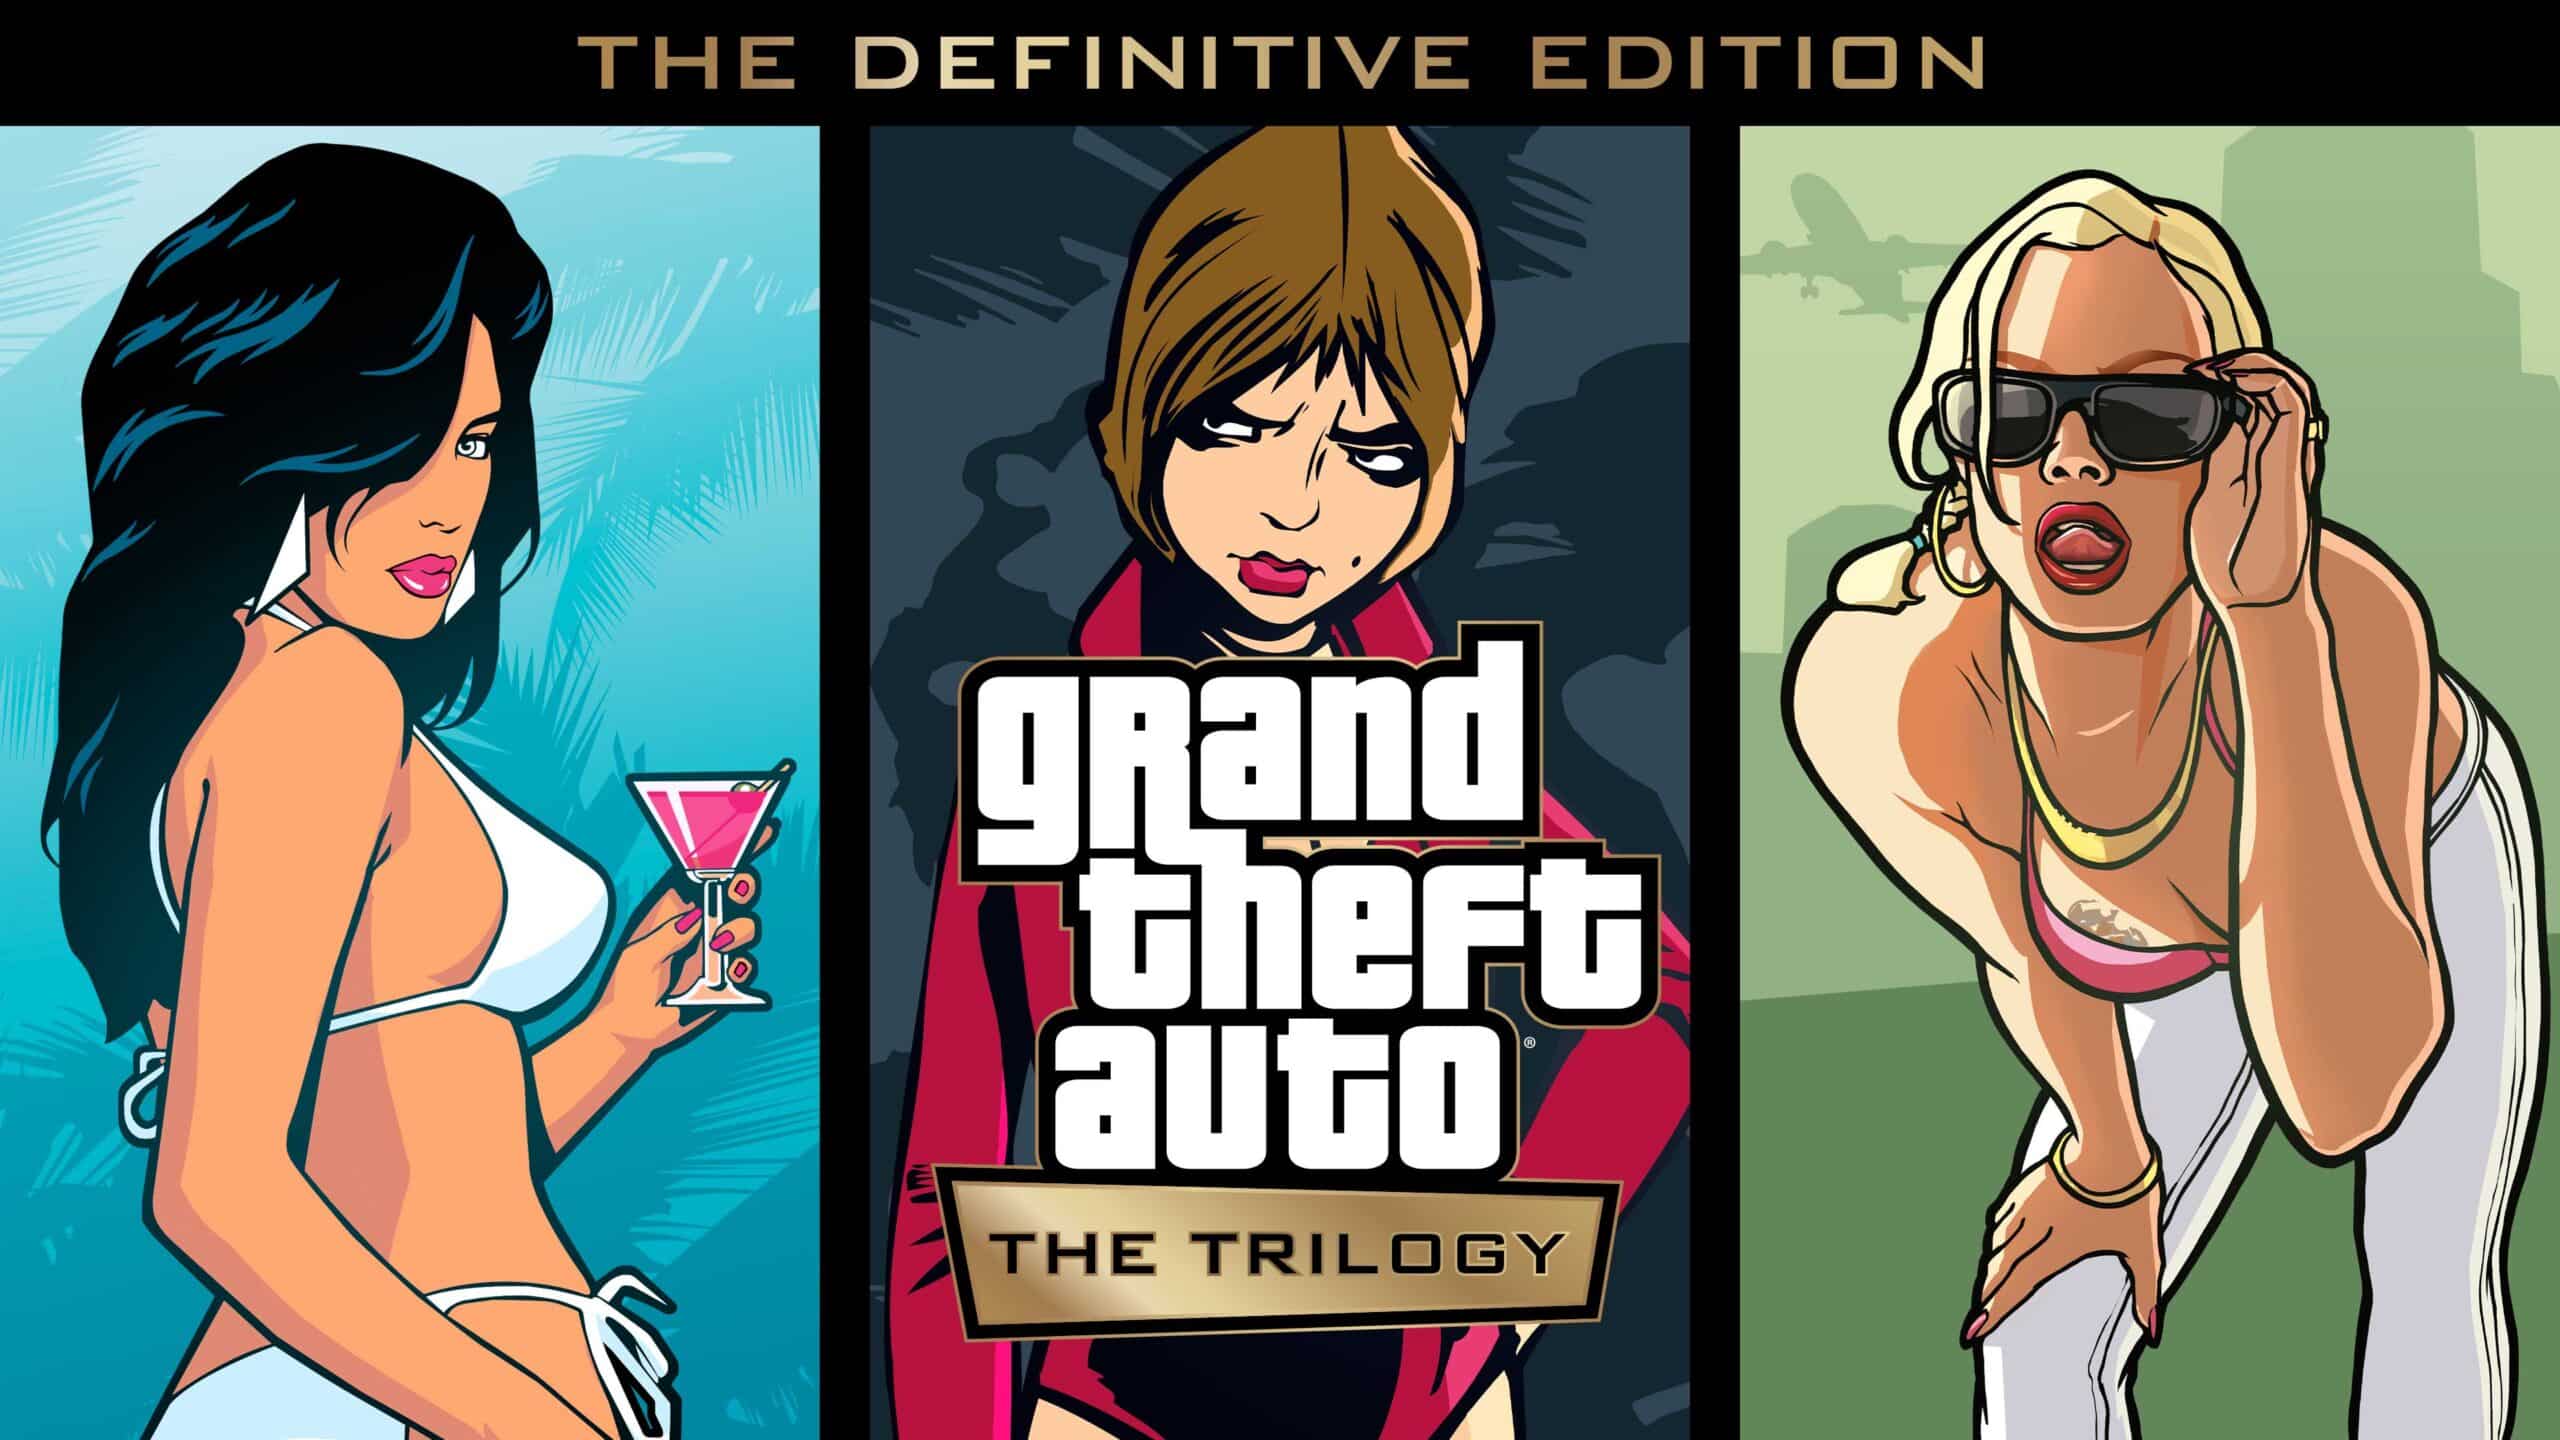 Grand Theft Auto: The Trilogy - The Definitive Edition Artwork